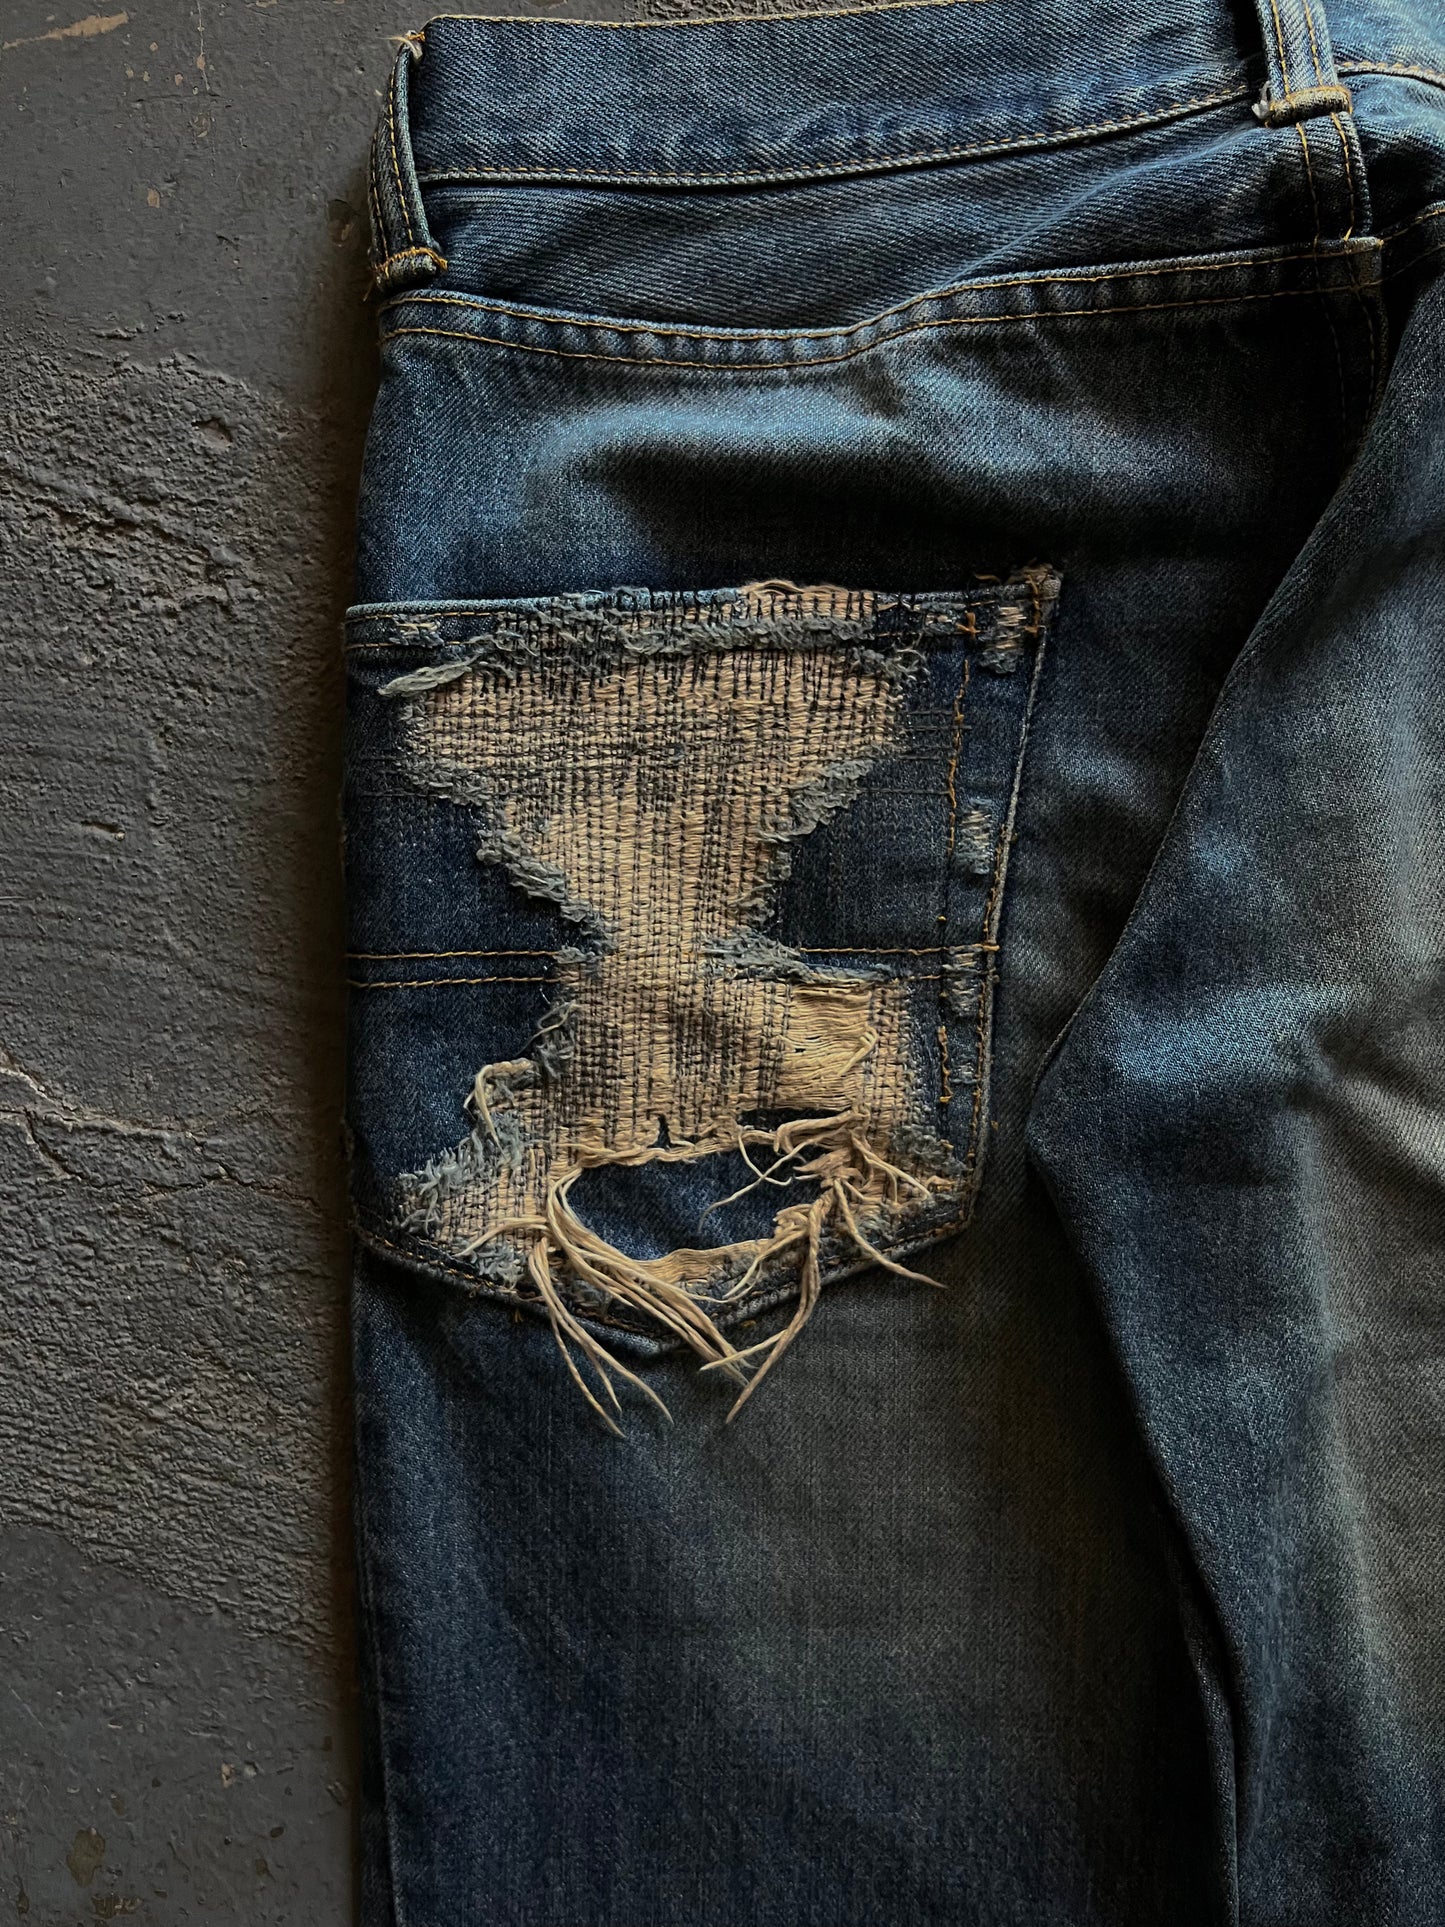 Undercover AW05 “Arts & Crafts” Heart Denim Boro Patchwork Jeans